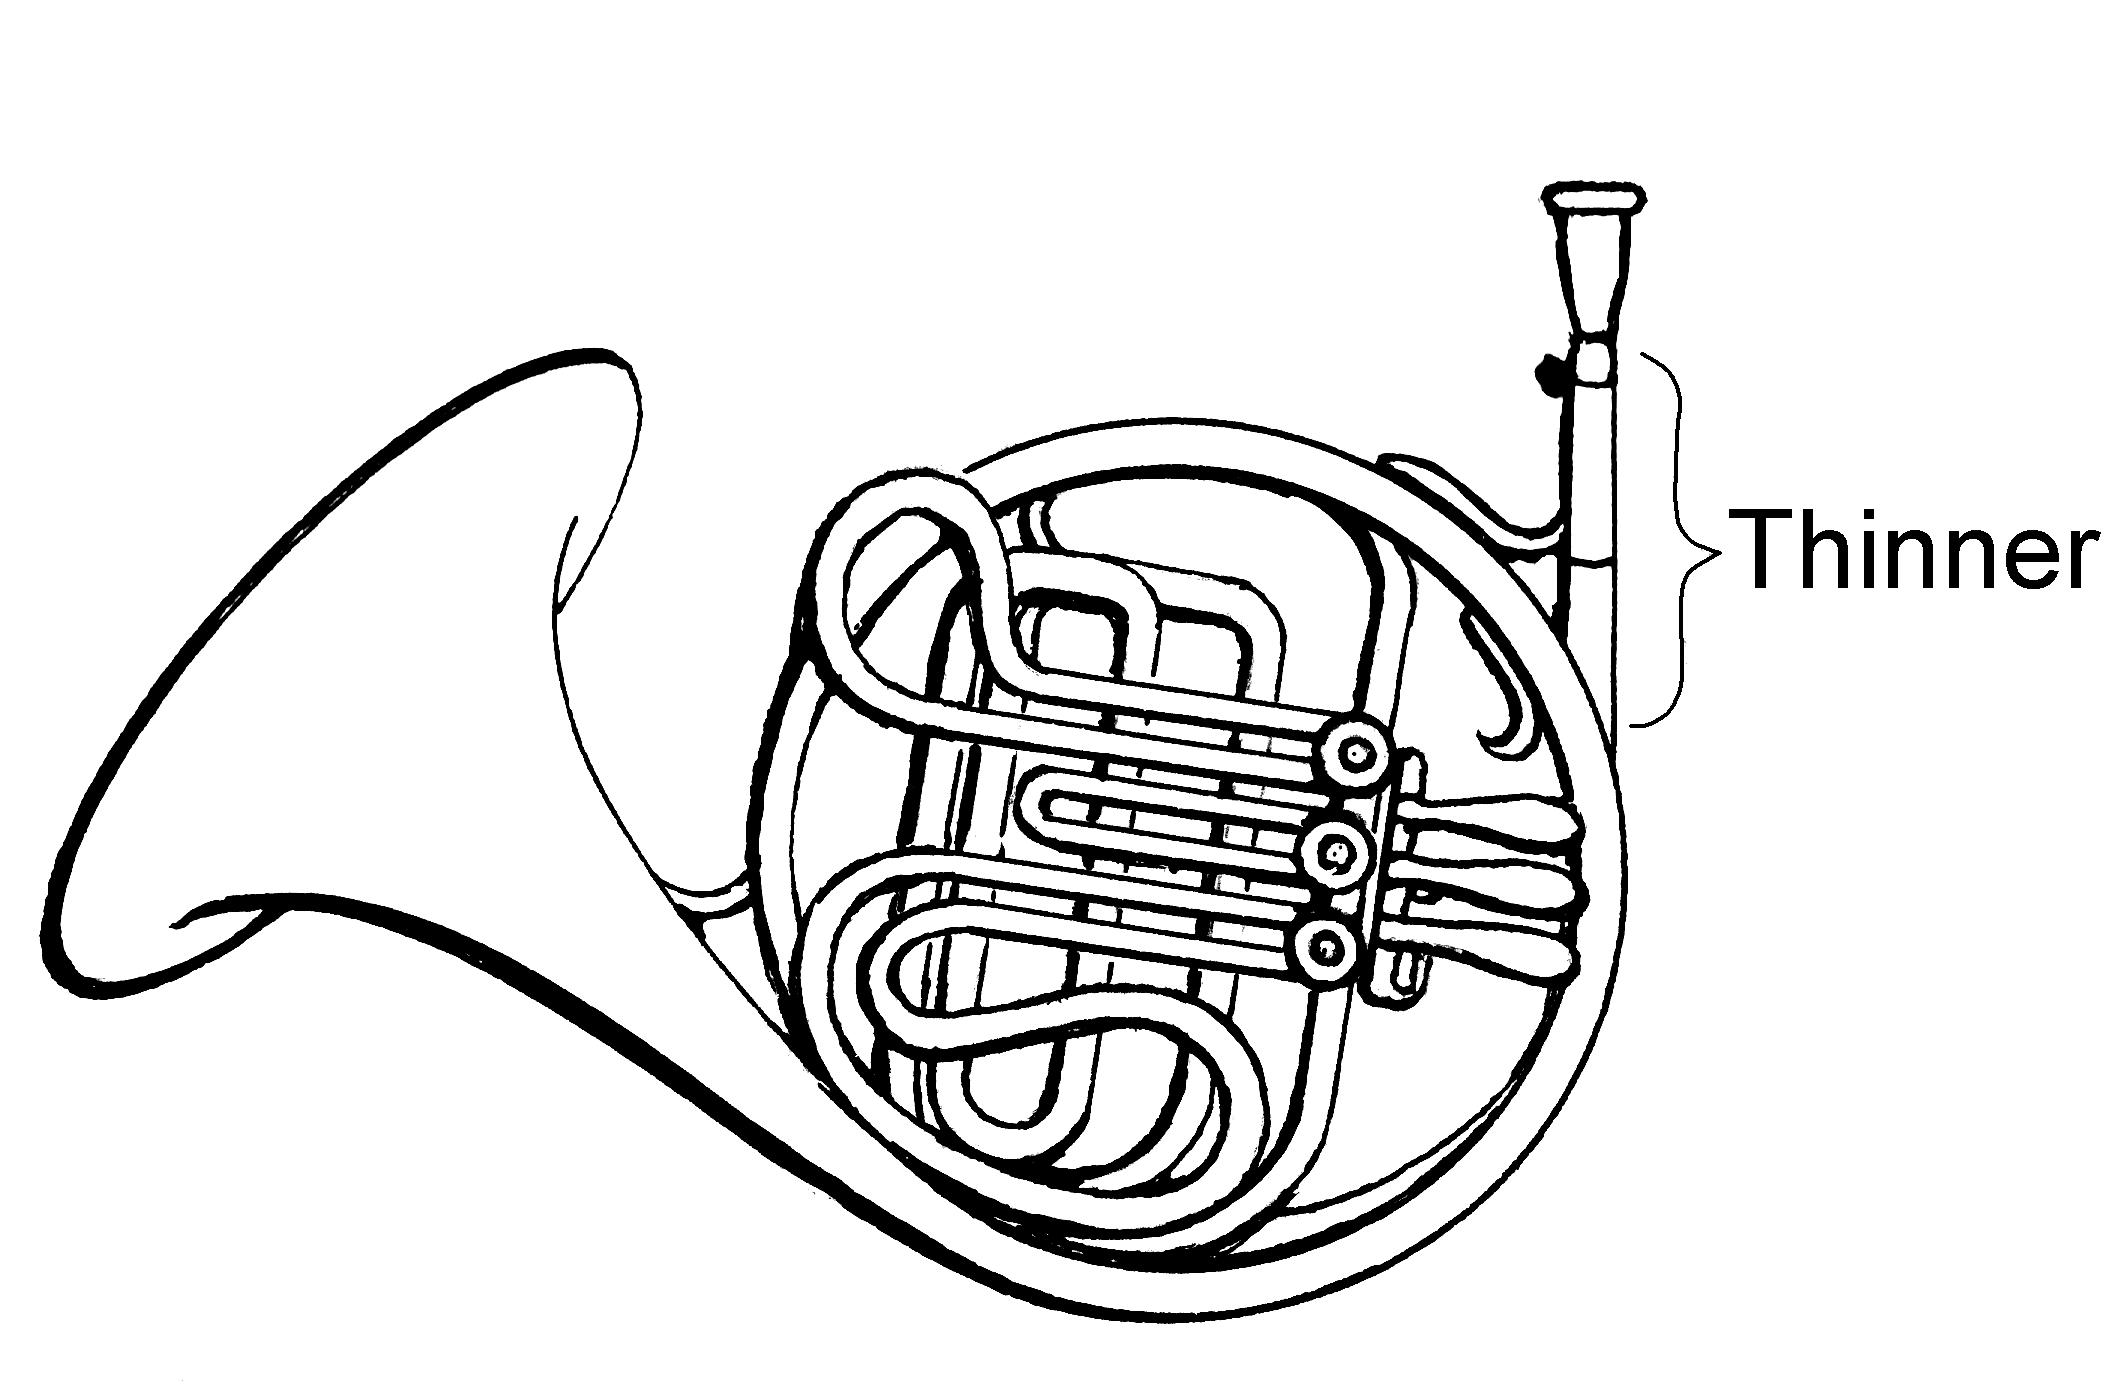 Free Clipart Of A french horn